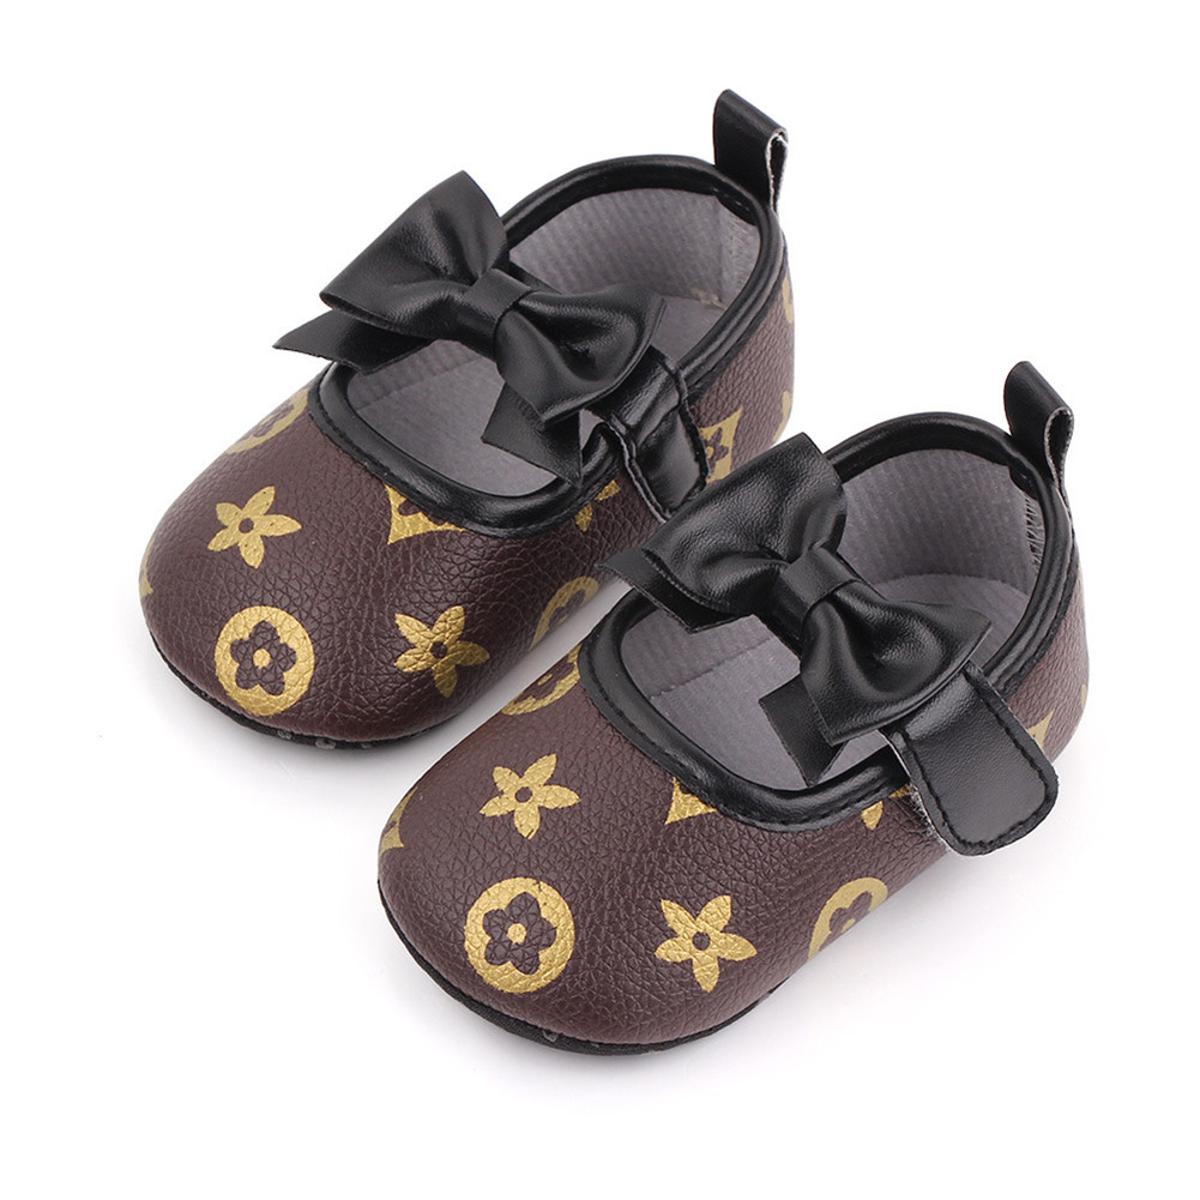 1 Pair Of Girls Shoes Bowknot Soft Sole Toddler Shoes For 3-12